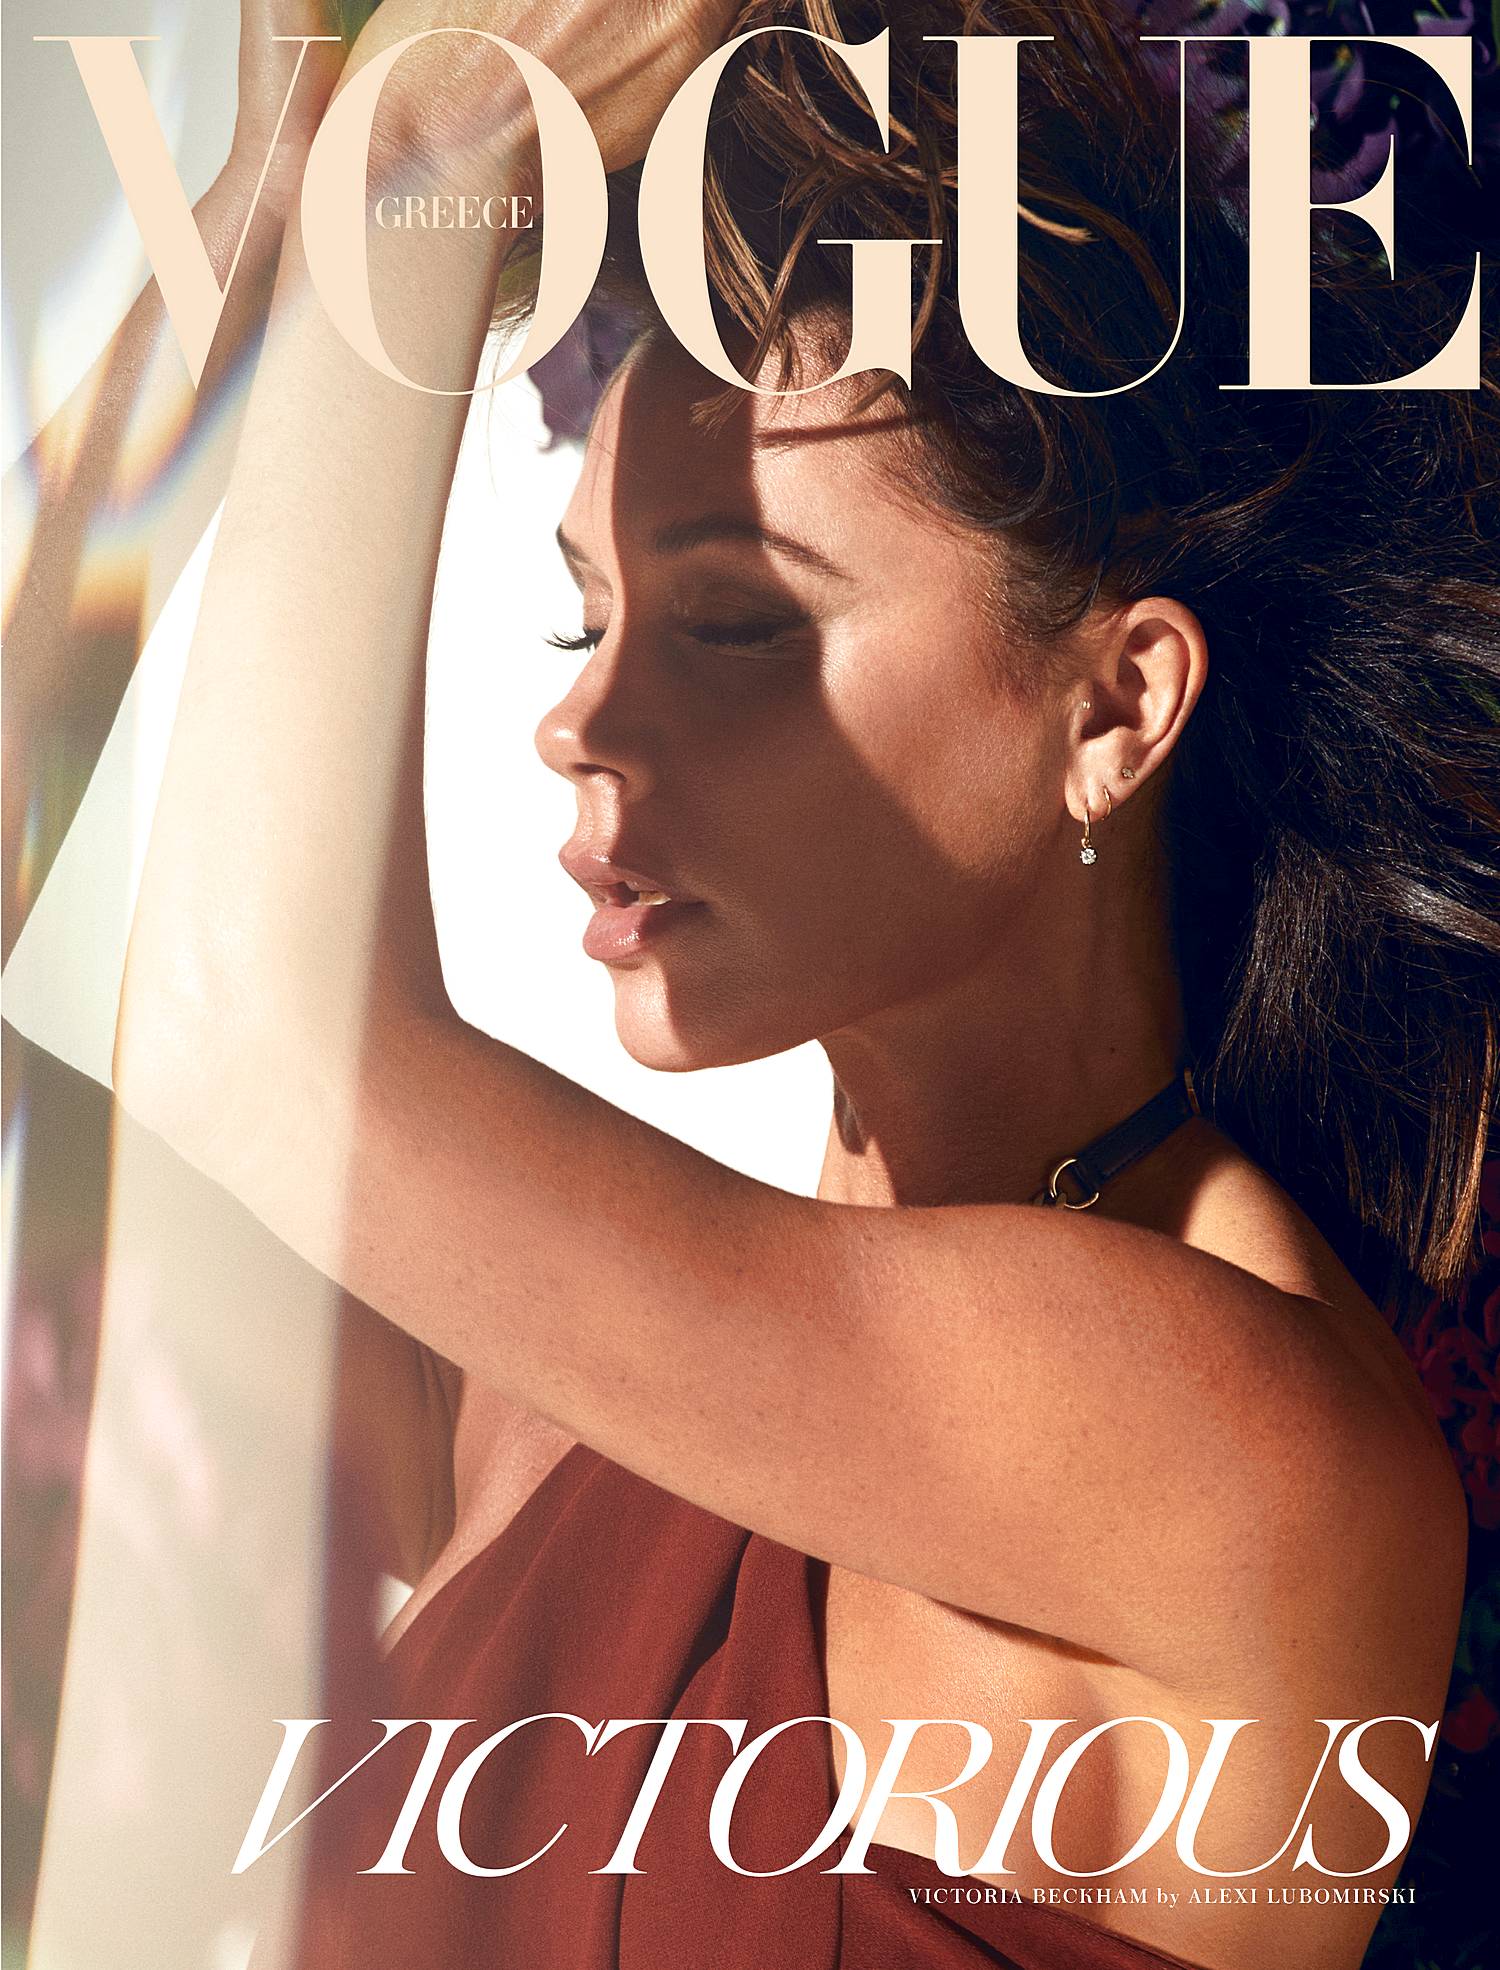 Vogue Greece celebrated the 5 year anniversary with a sensational 